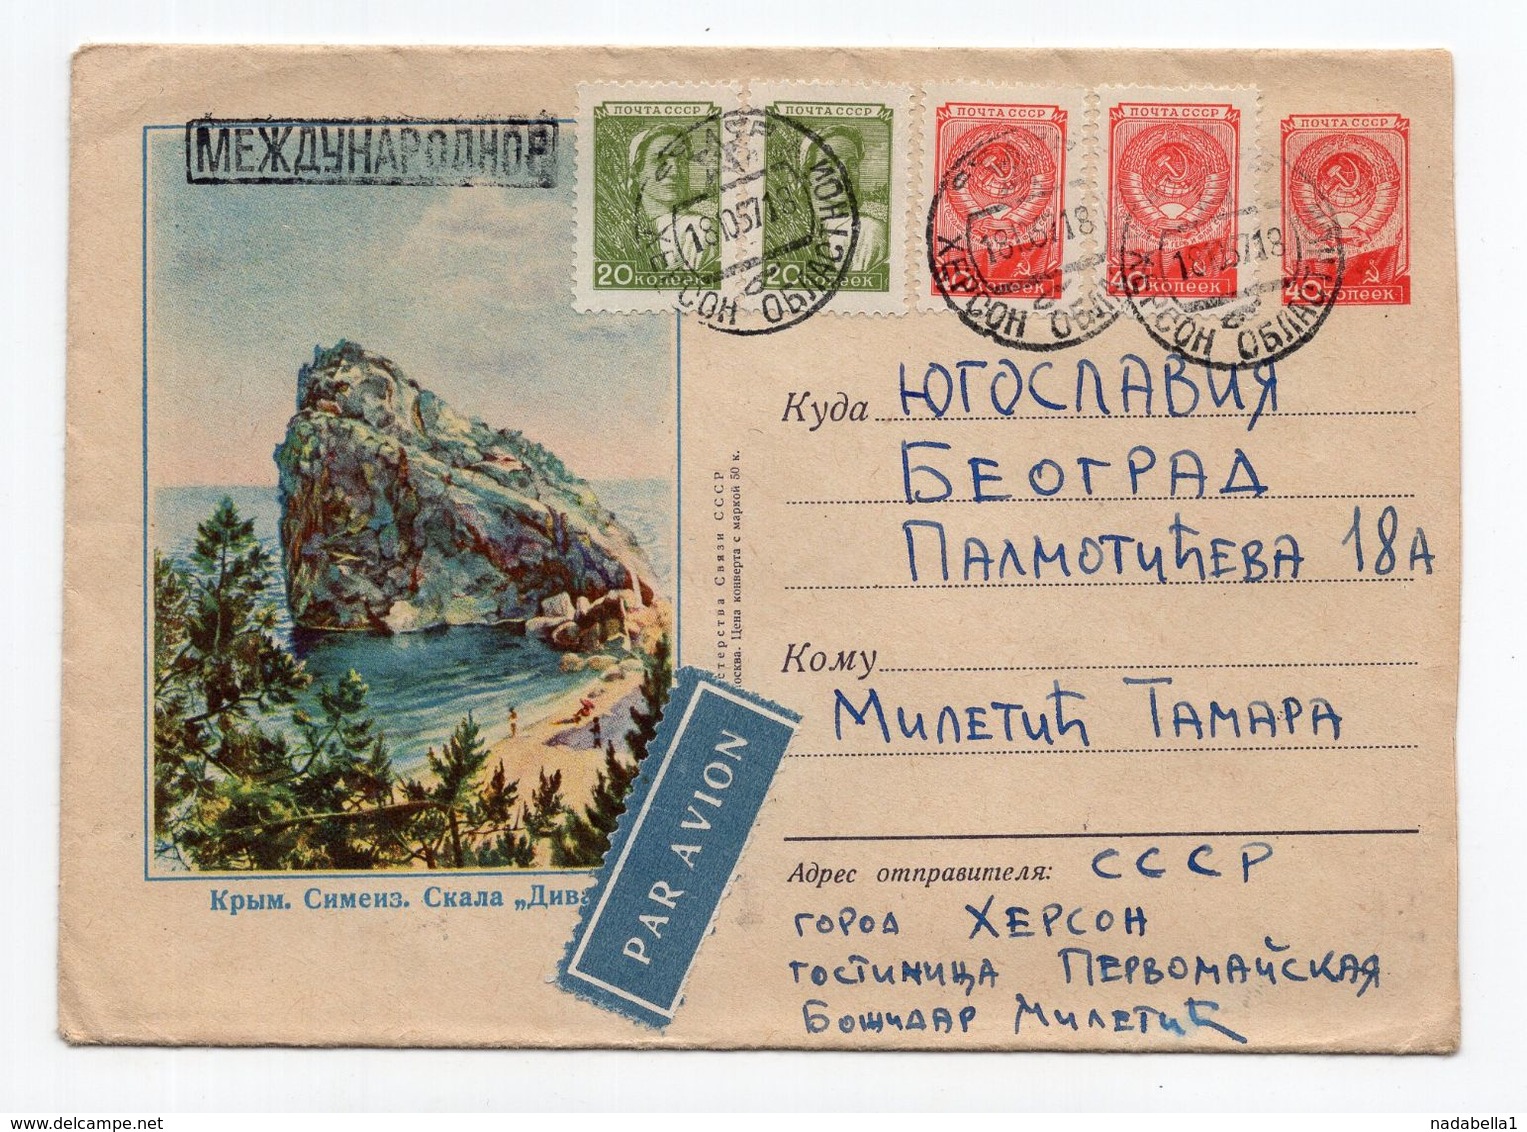 1957 RUSSIA,HERSON TO BELGRADE,YUGOSLAVIA,AIRMAIL,CRIMEA DIVA ROCK,ILLUSTRATED STATIONERY COVER,USED - Covers & Documents